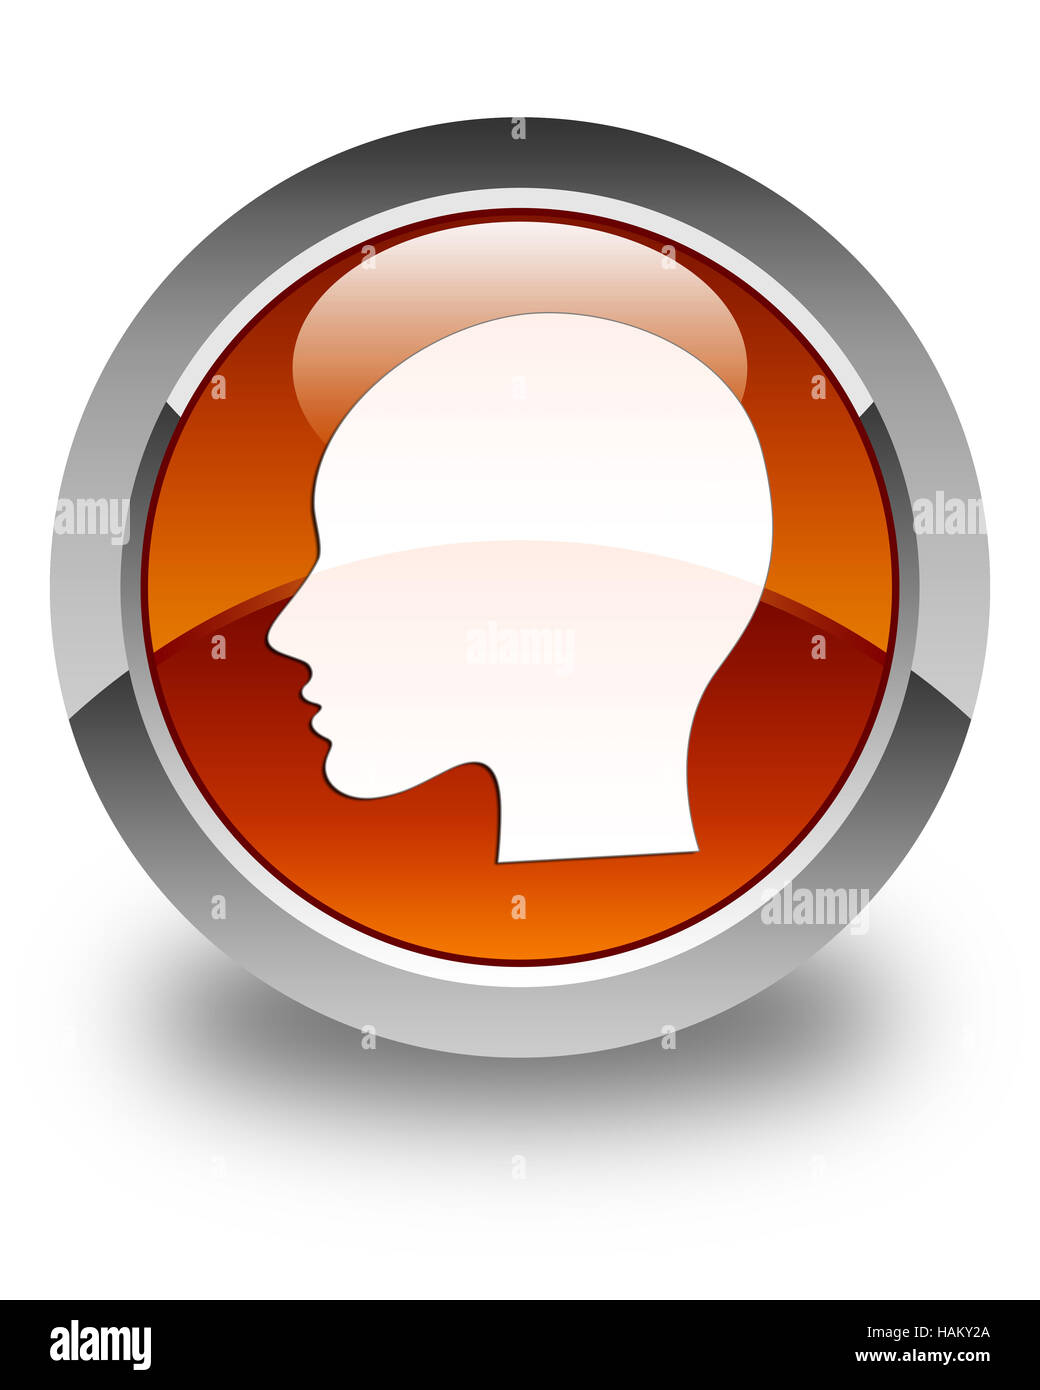 Head woman face icon isolated on glossy brown round button abstract illustration Stock Photo